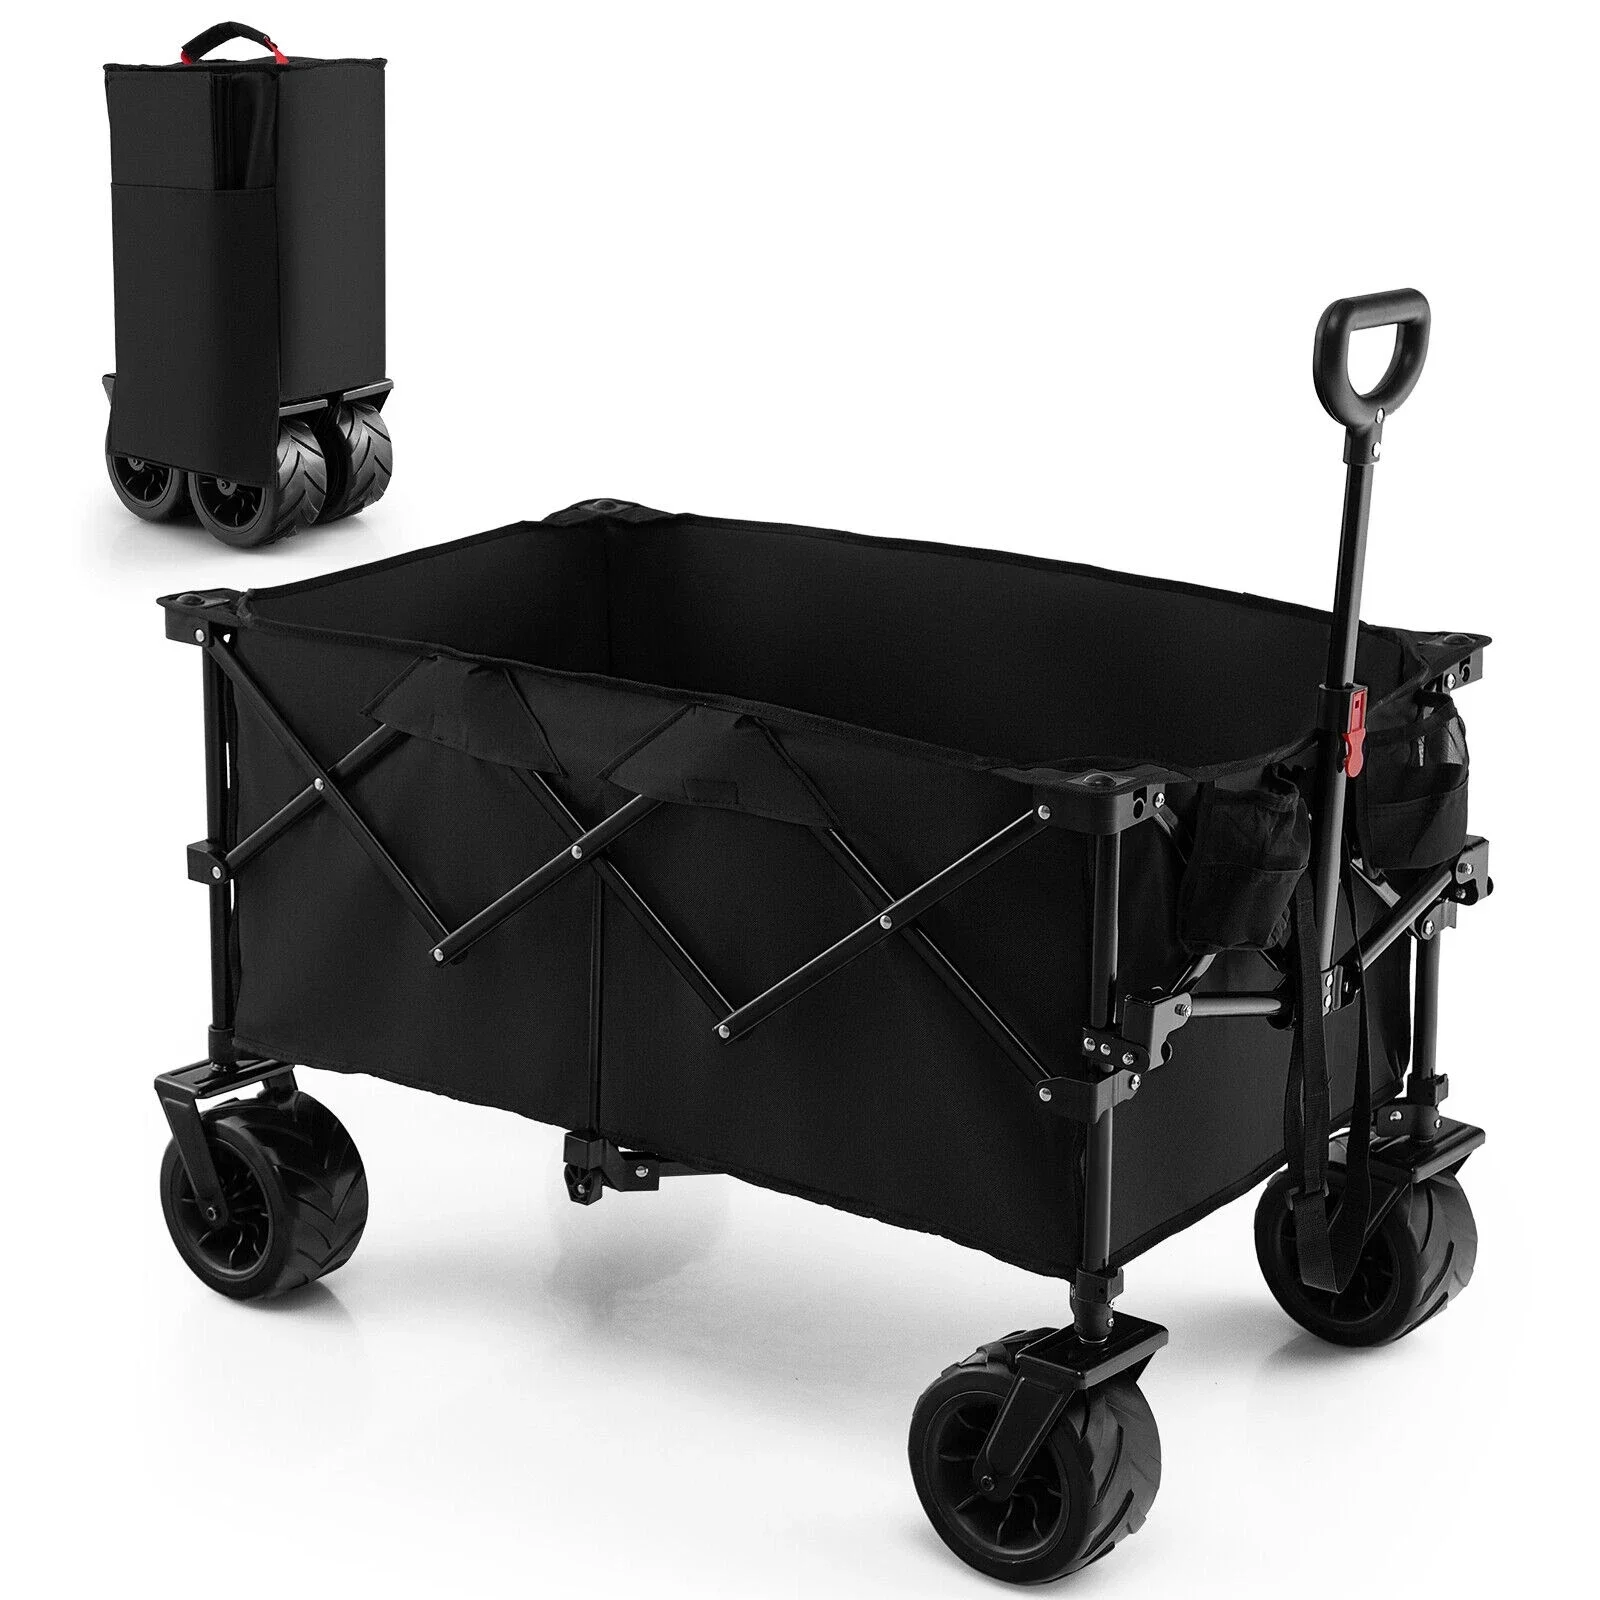 

New Collapsible Folding Wagons Carts Large Capacity Beach Wagon with All-Terrain Big Wheels Outdoor Camping Shopping